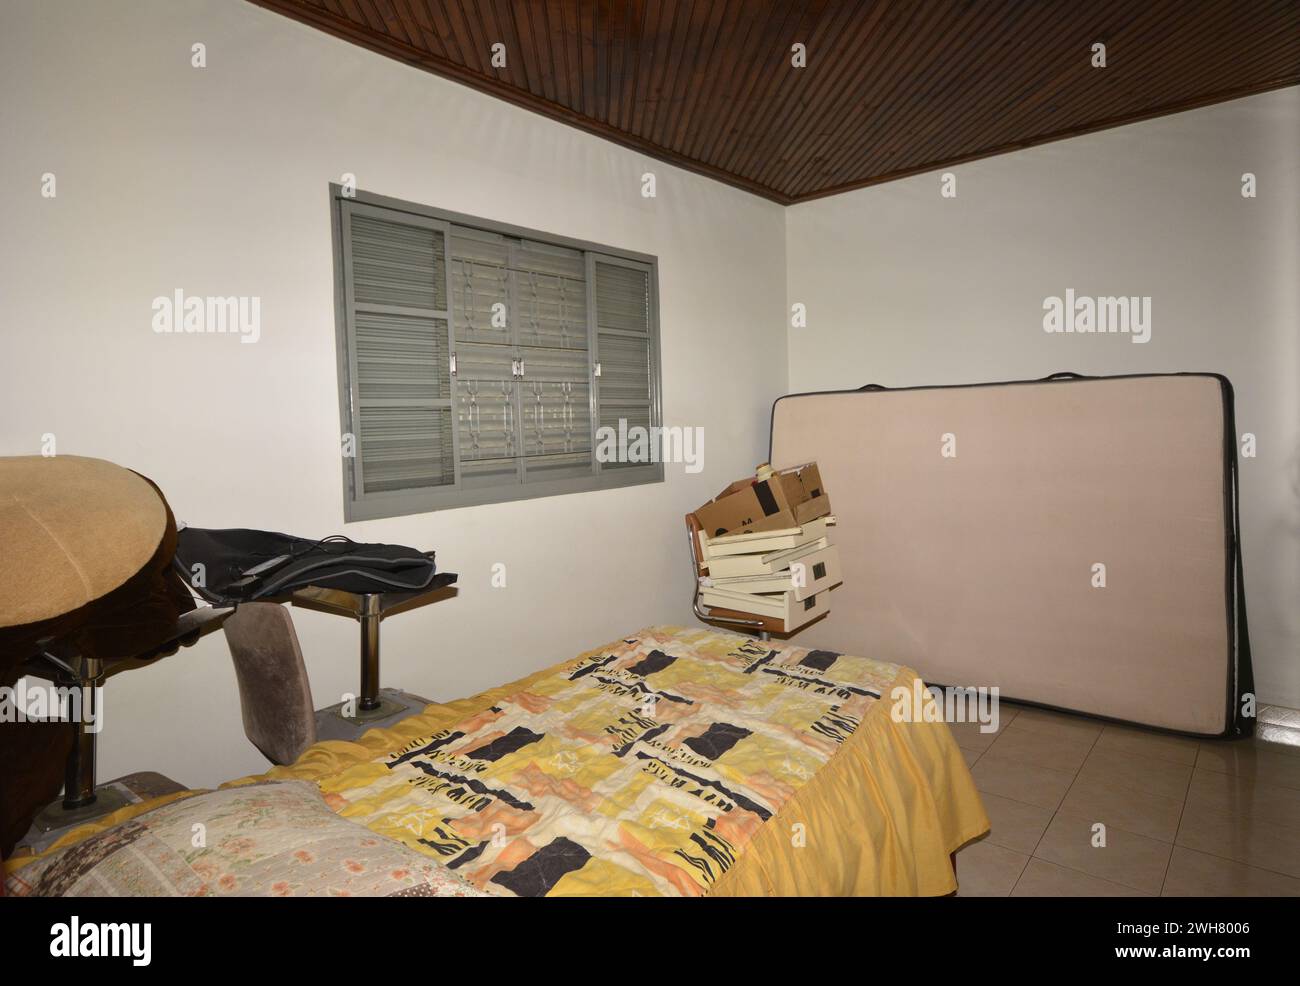 Residence room with : bed, chair, drawers and mattress, Brazil, South America Stock Photo